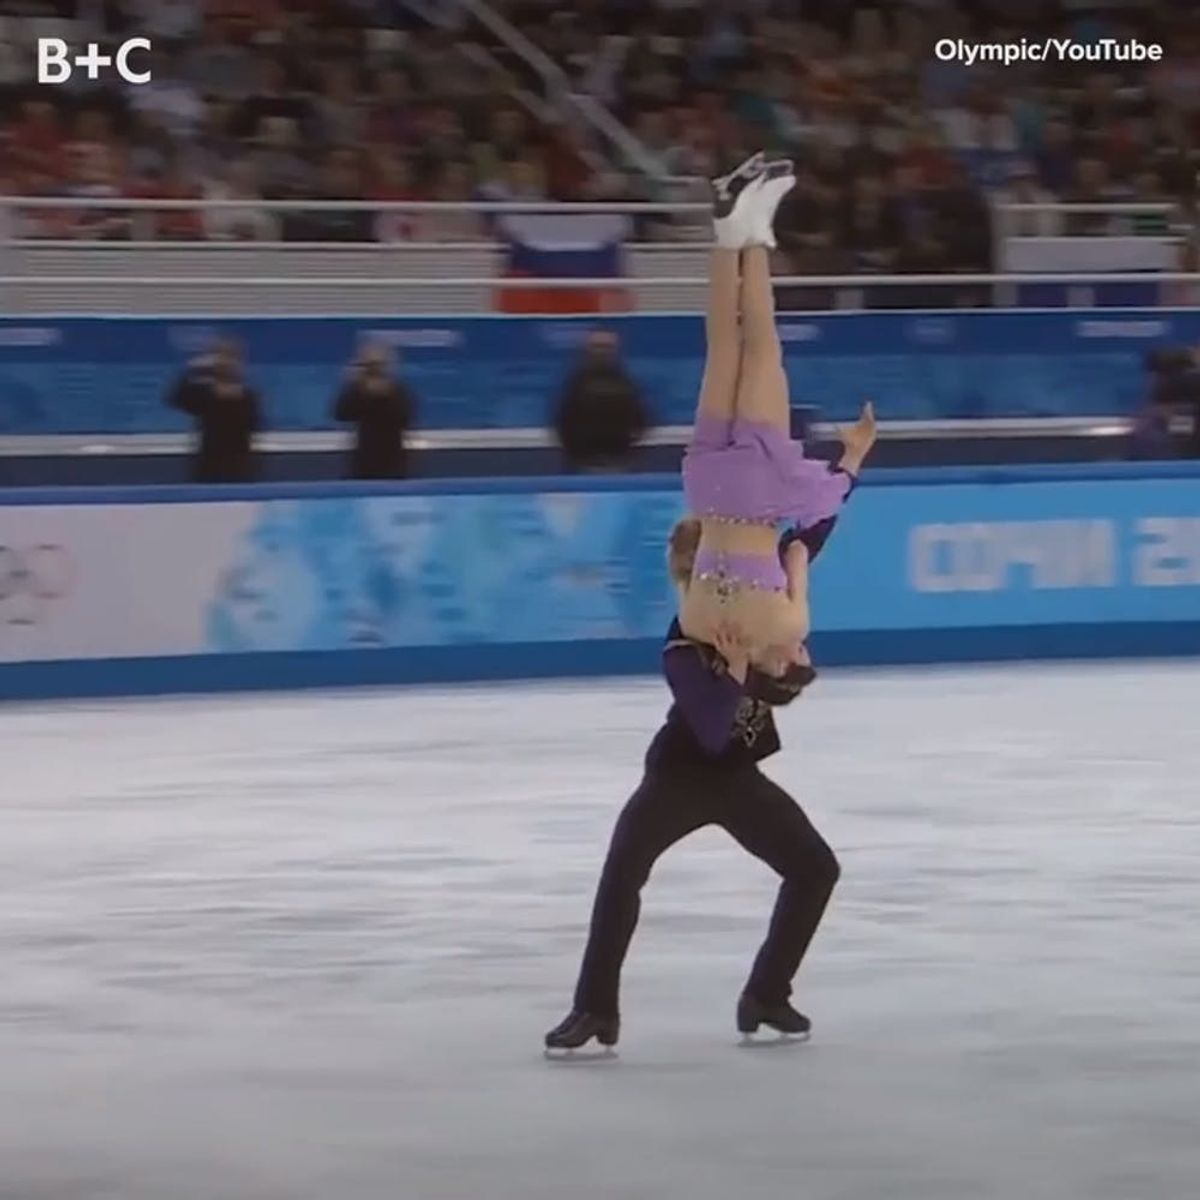 Epic Olympic Figure Skating Moves That Defy Gravity